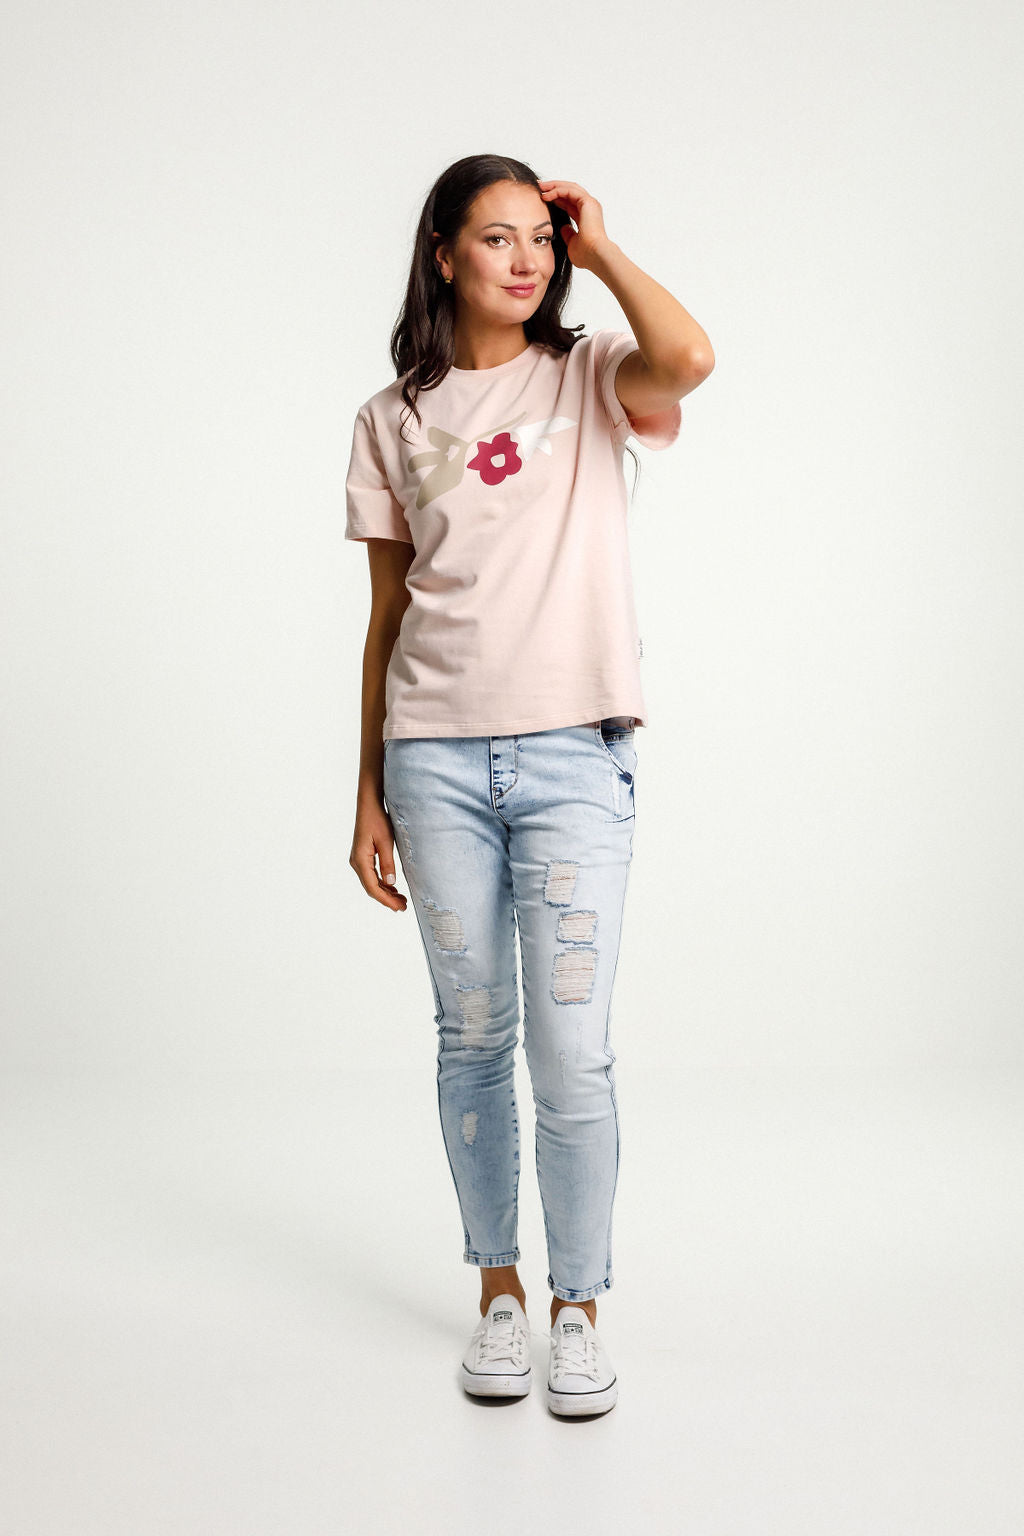 Chris Tee - Winter Weight - Sale - Peach with Meta Floral Bouquet Print